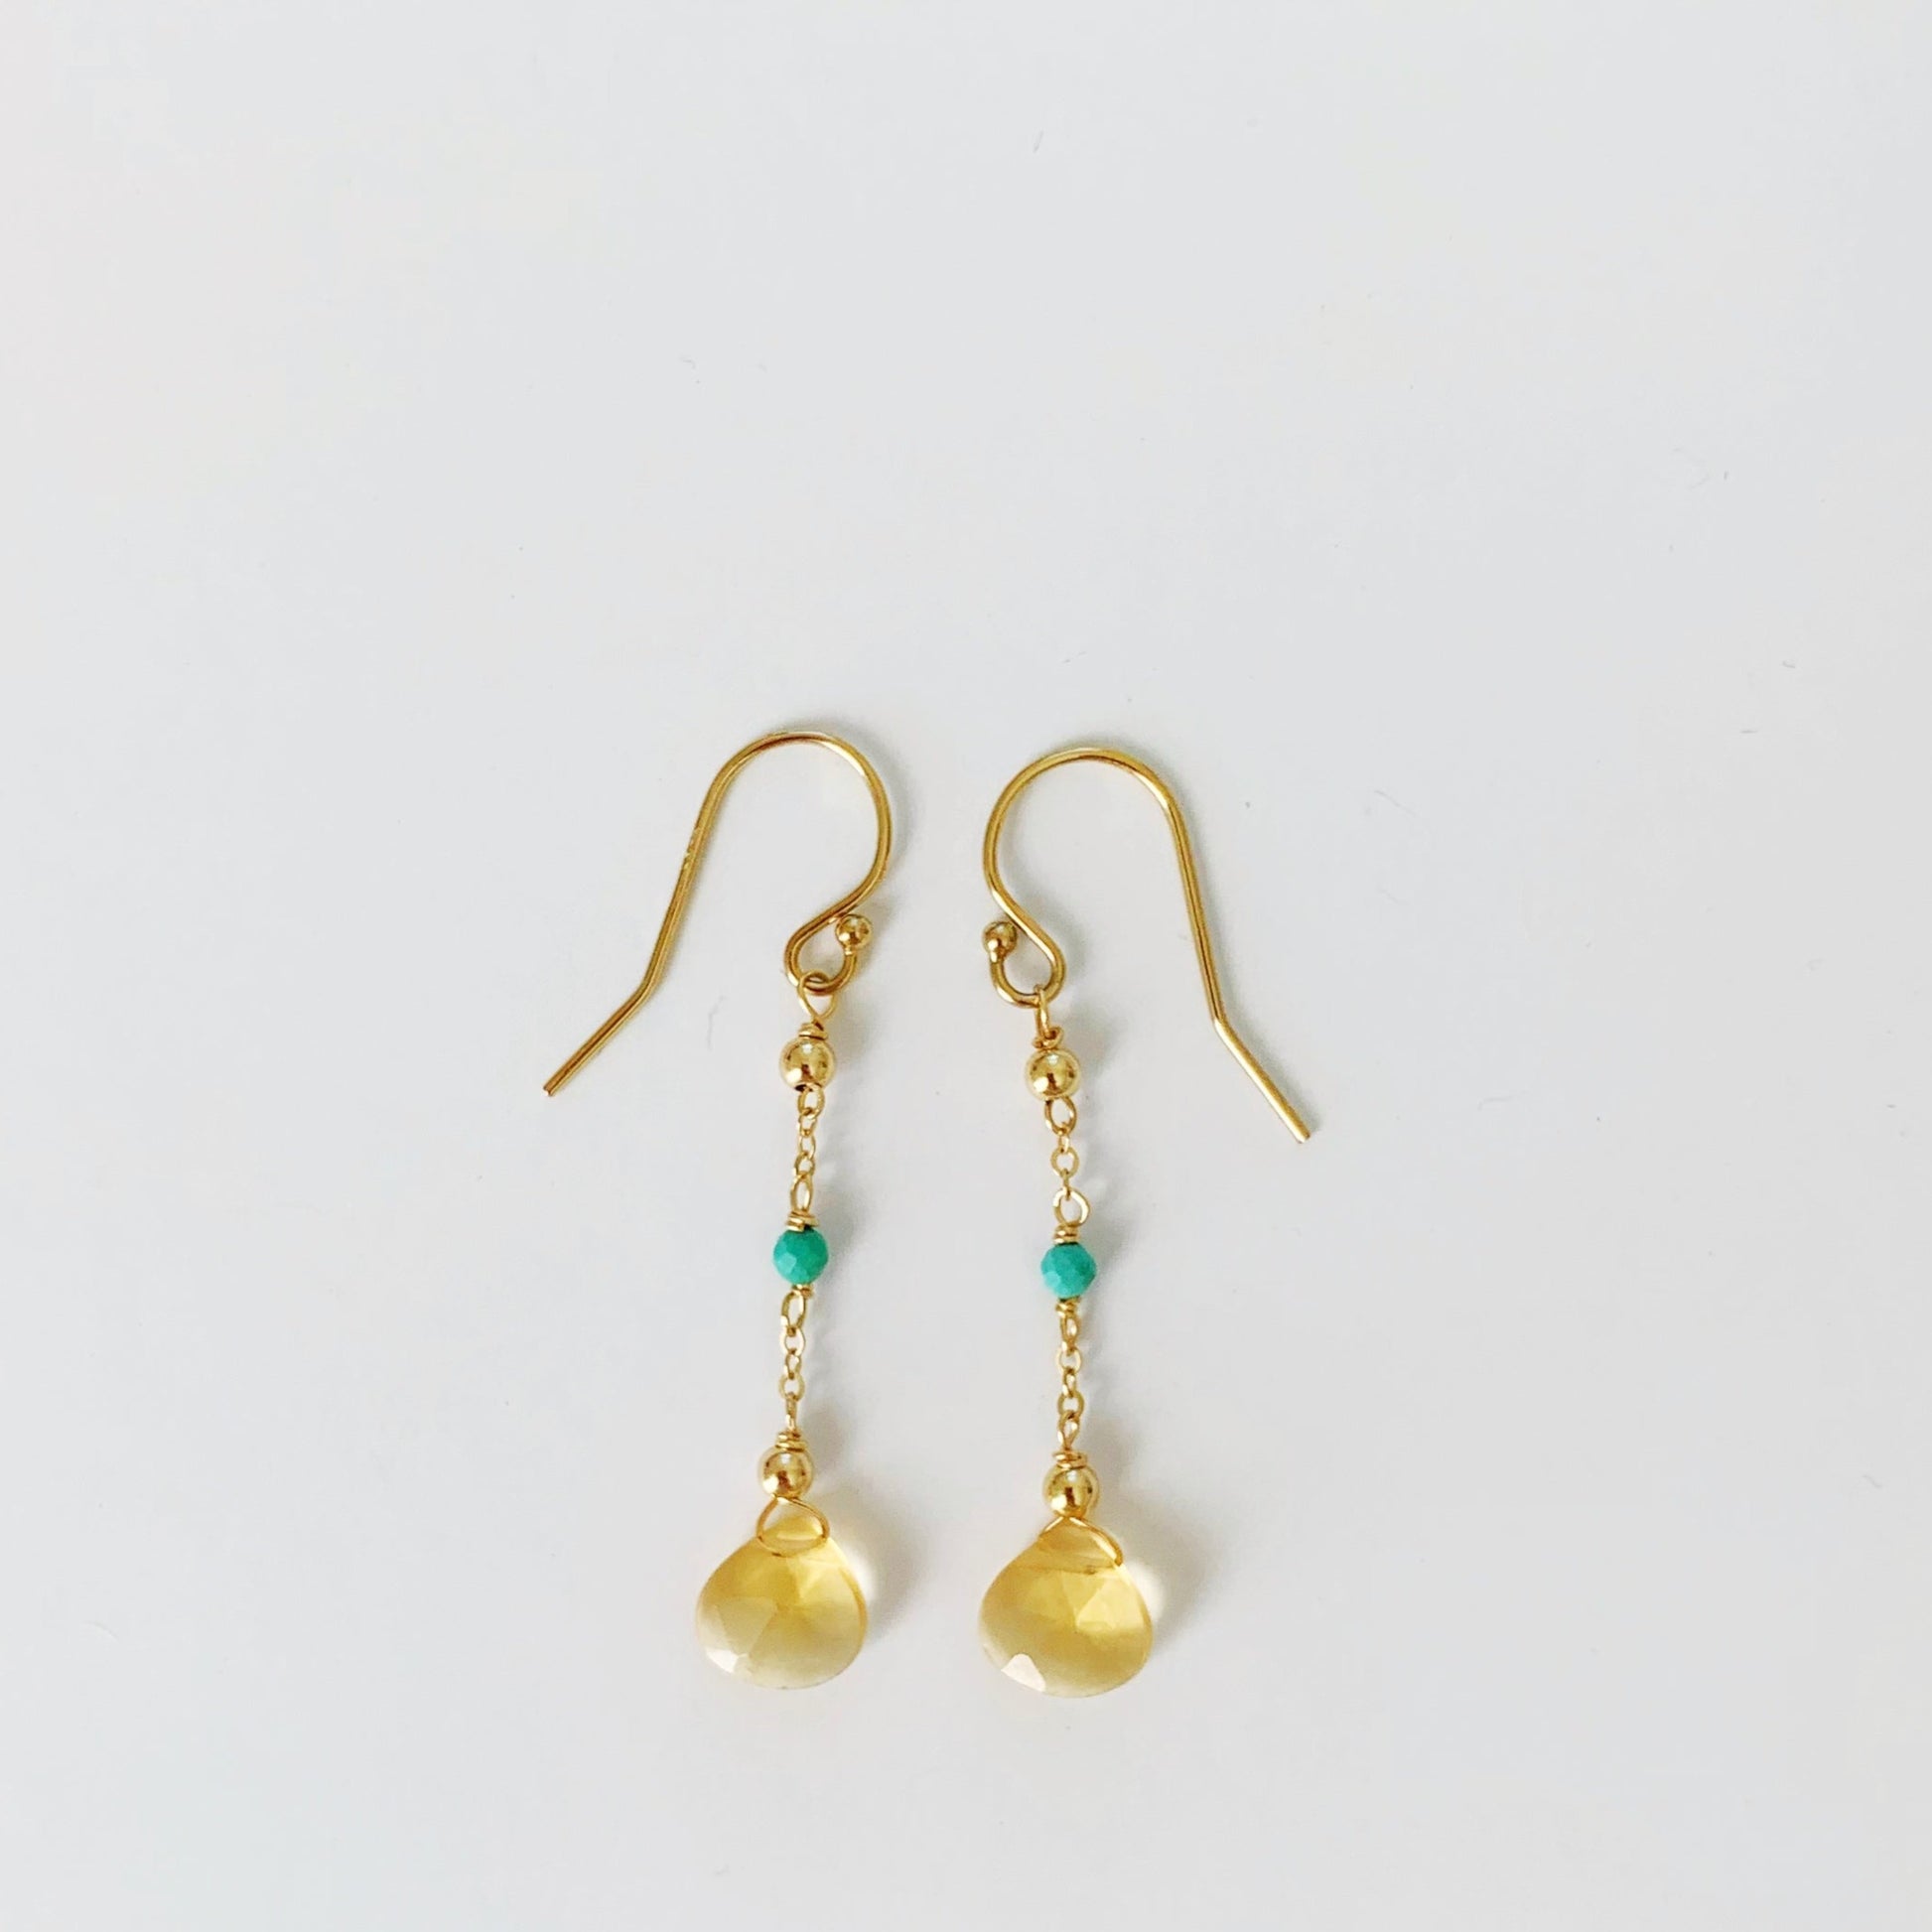 Ray of sunshine earrings by mermaids and madeleines are linear earrings with a yellow citrine drop and natural turquoise on 14k gold filled chain and findings. this pair is photographed on a white background